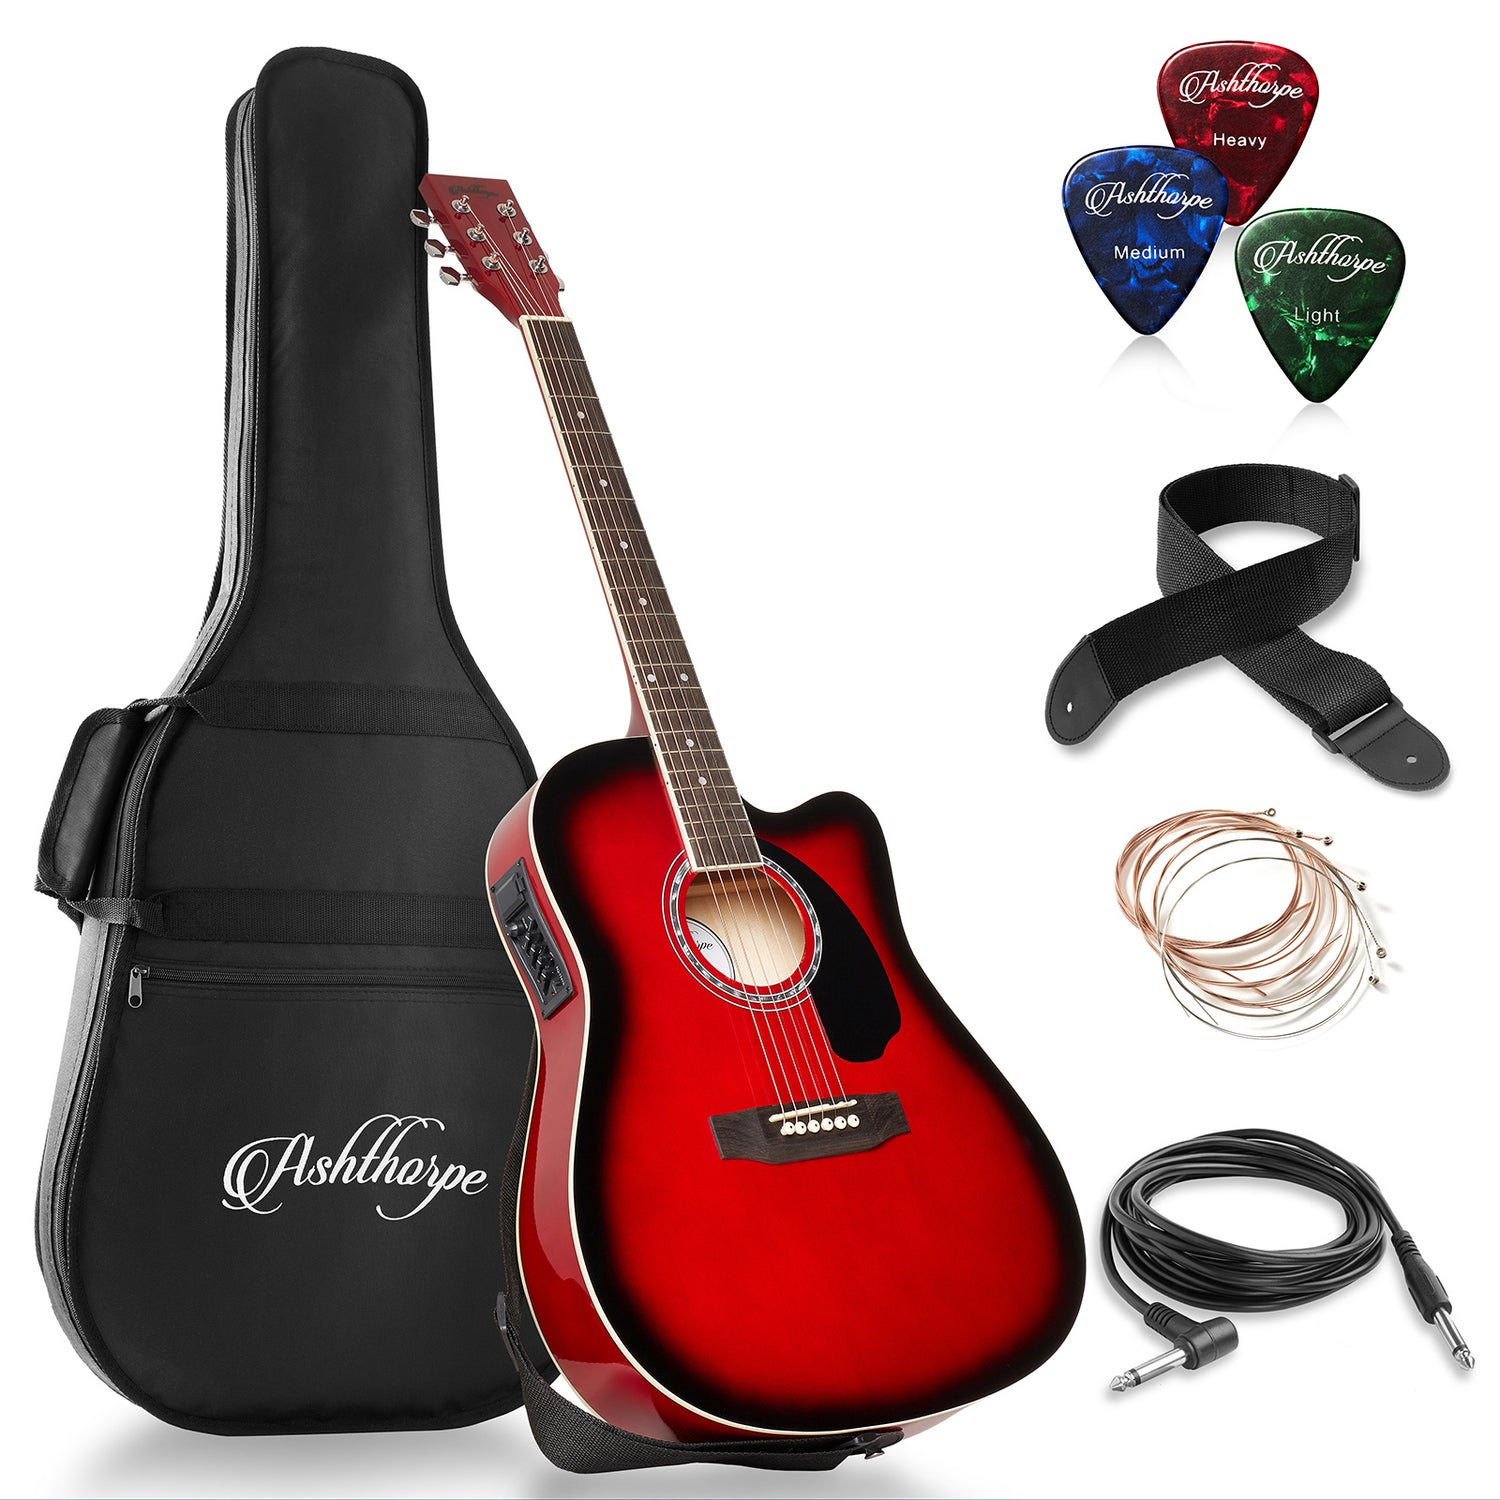 Ashthorpe Full-Size Cutaway Thinline Acoustic-Electric Guitar Package Premium Tonewoods, Blue Sigbeez